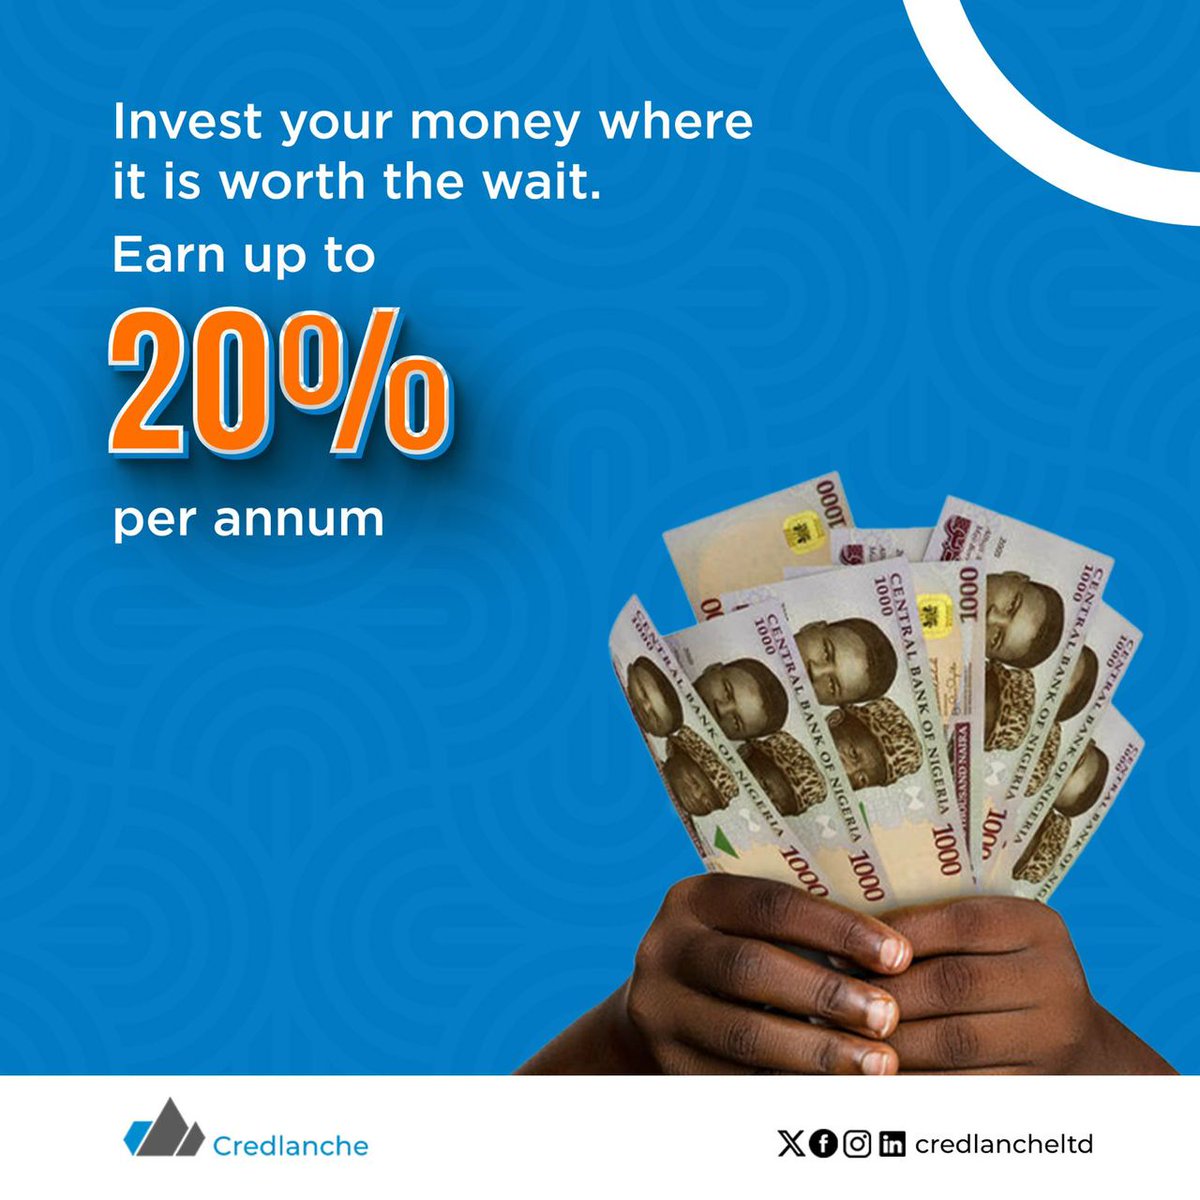 Invest with Credlanche and earn up to 20% per annum. What are you waiting for? Invest now!

#credlanche #investnow